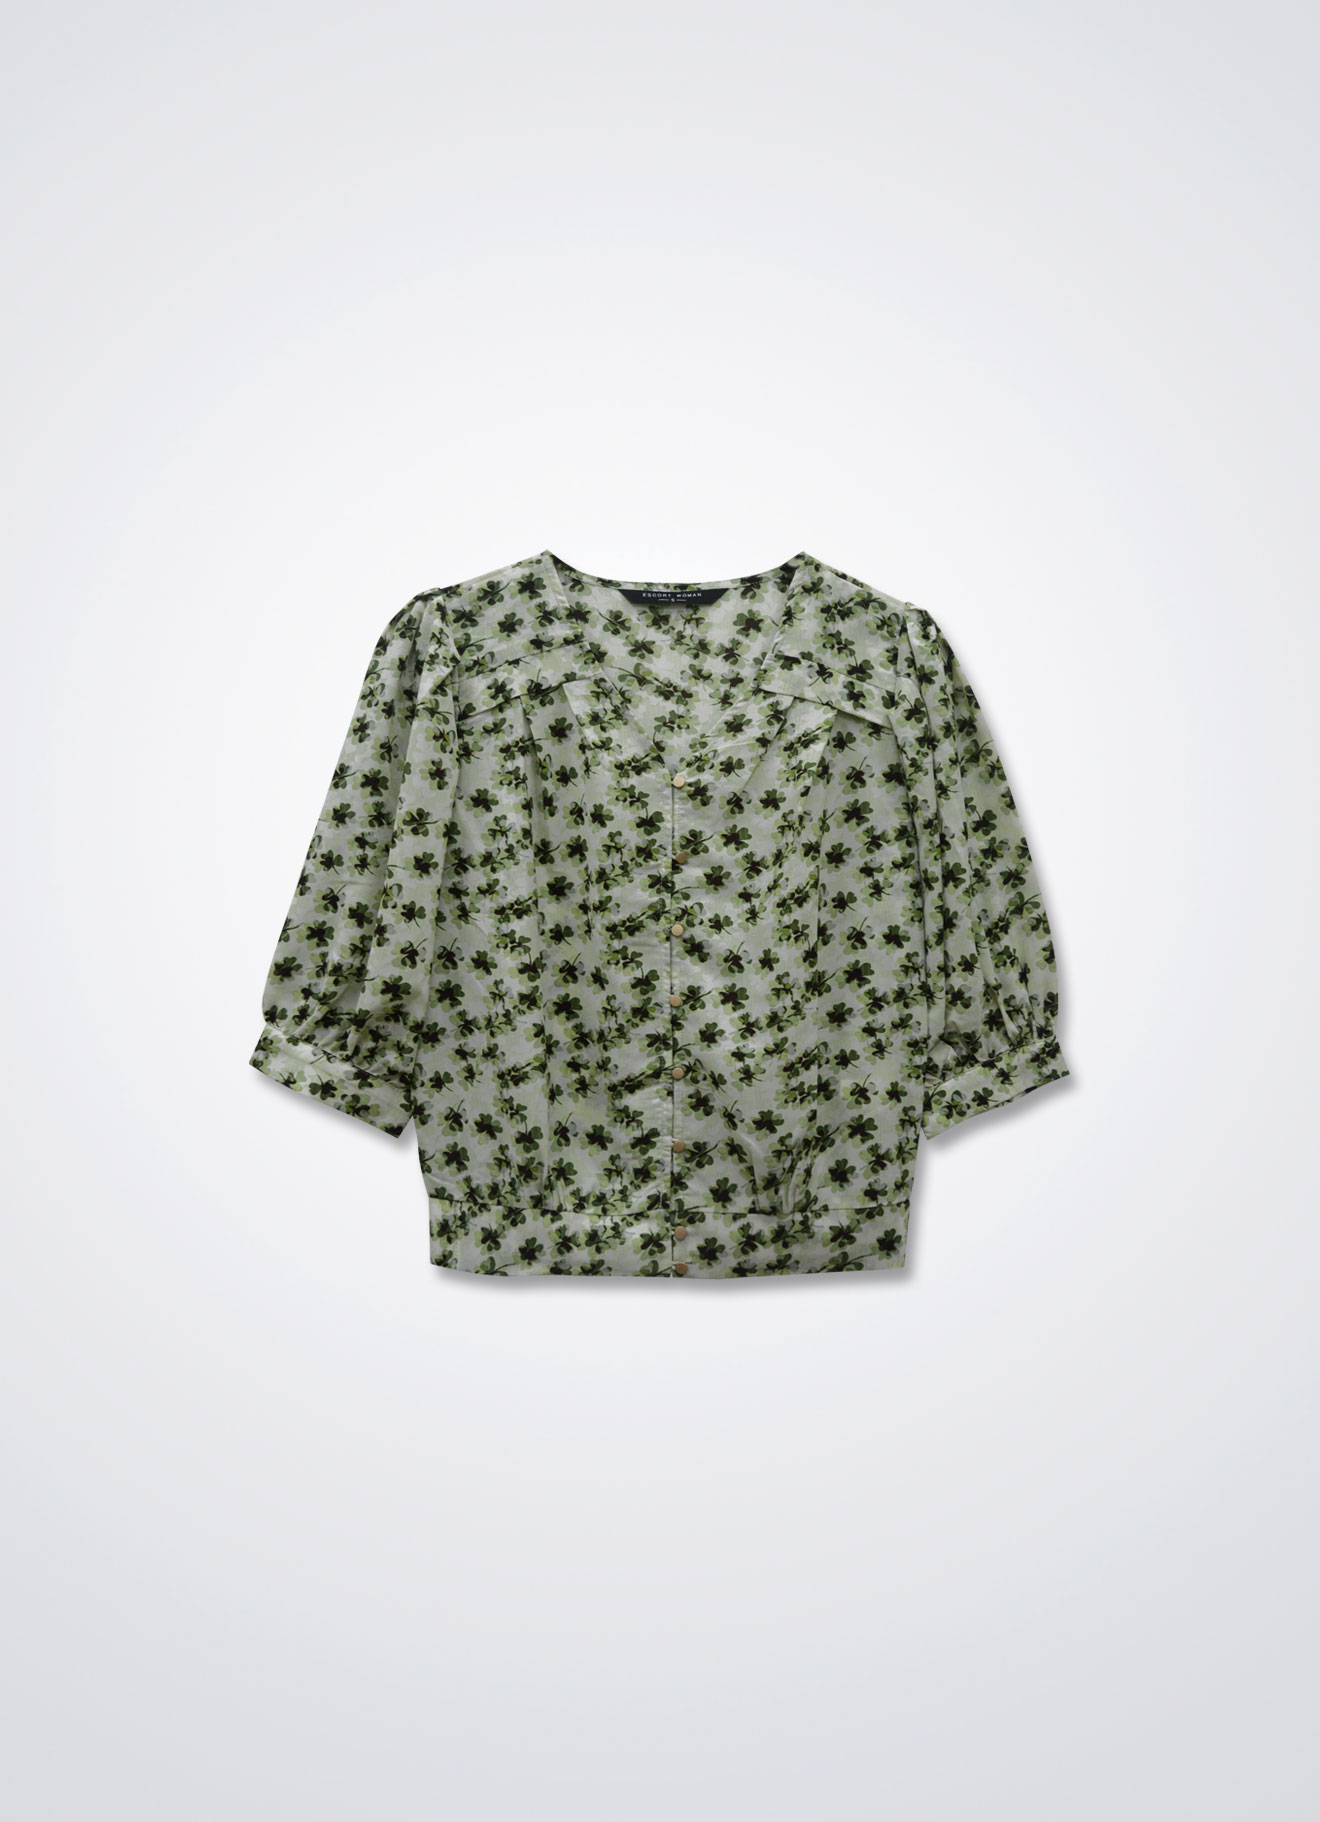 Arcadian-Green by Floral Printed Blouse